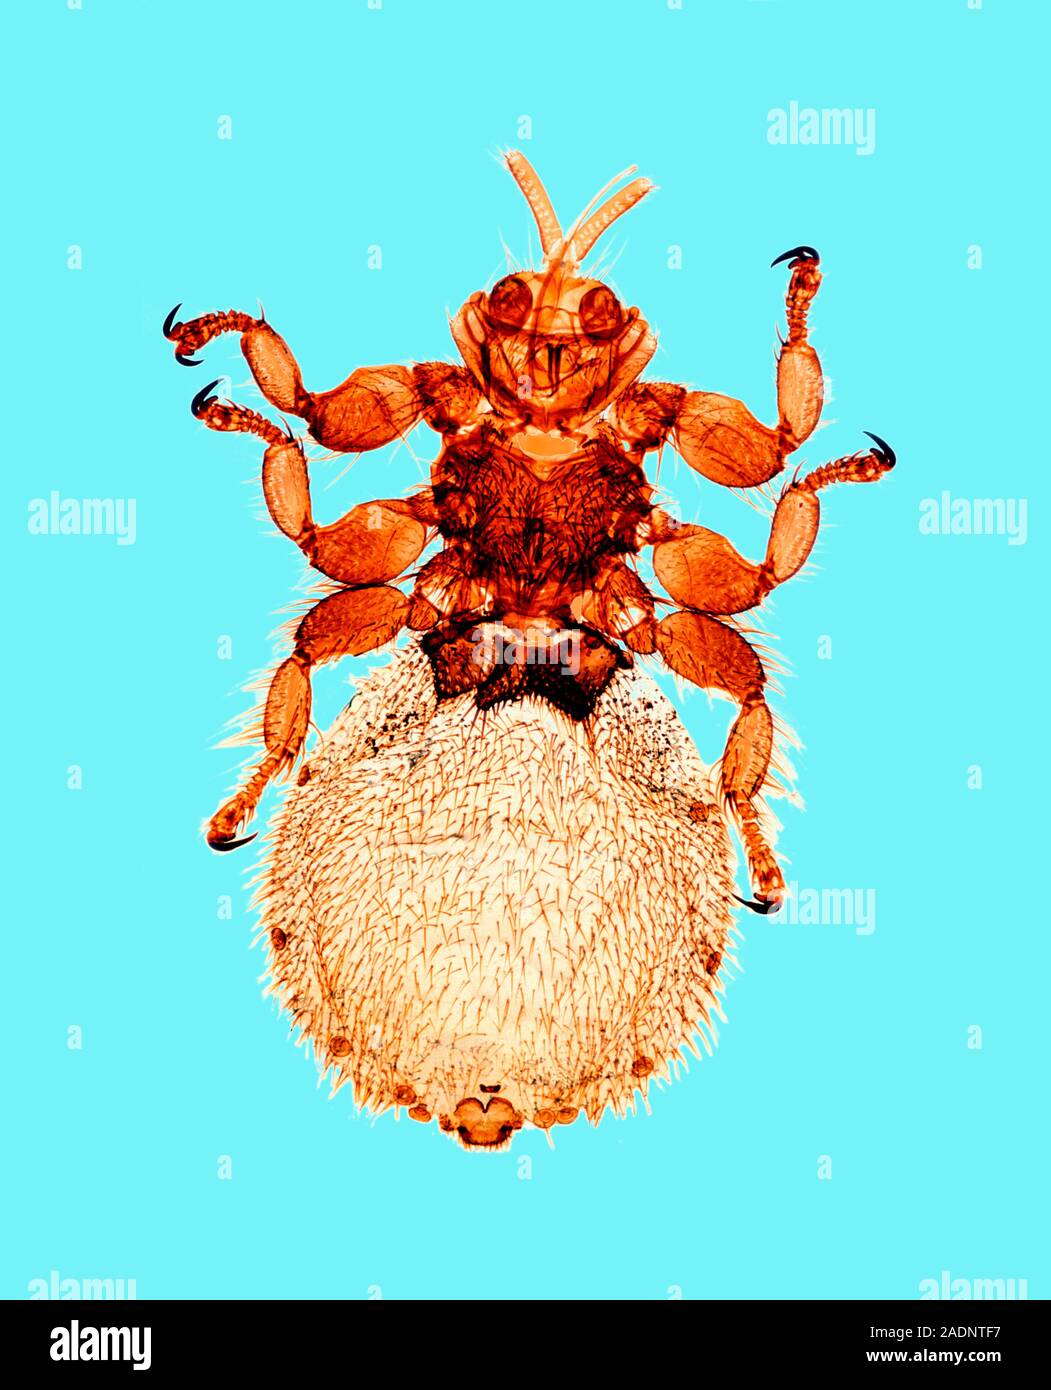 Sheep ked (Melophagus ovinus), light micrograph. This wingless, blood-sucking fly is an ectoparasite of sheep. The hooks on the ends of its legs help Stock Photo